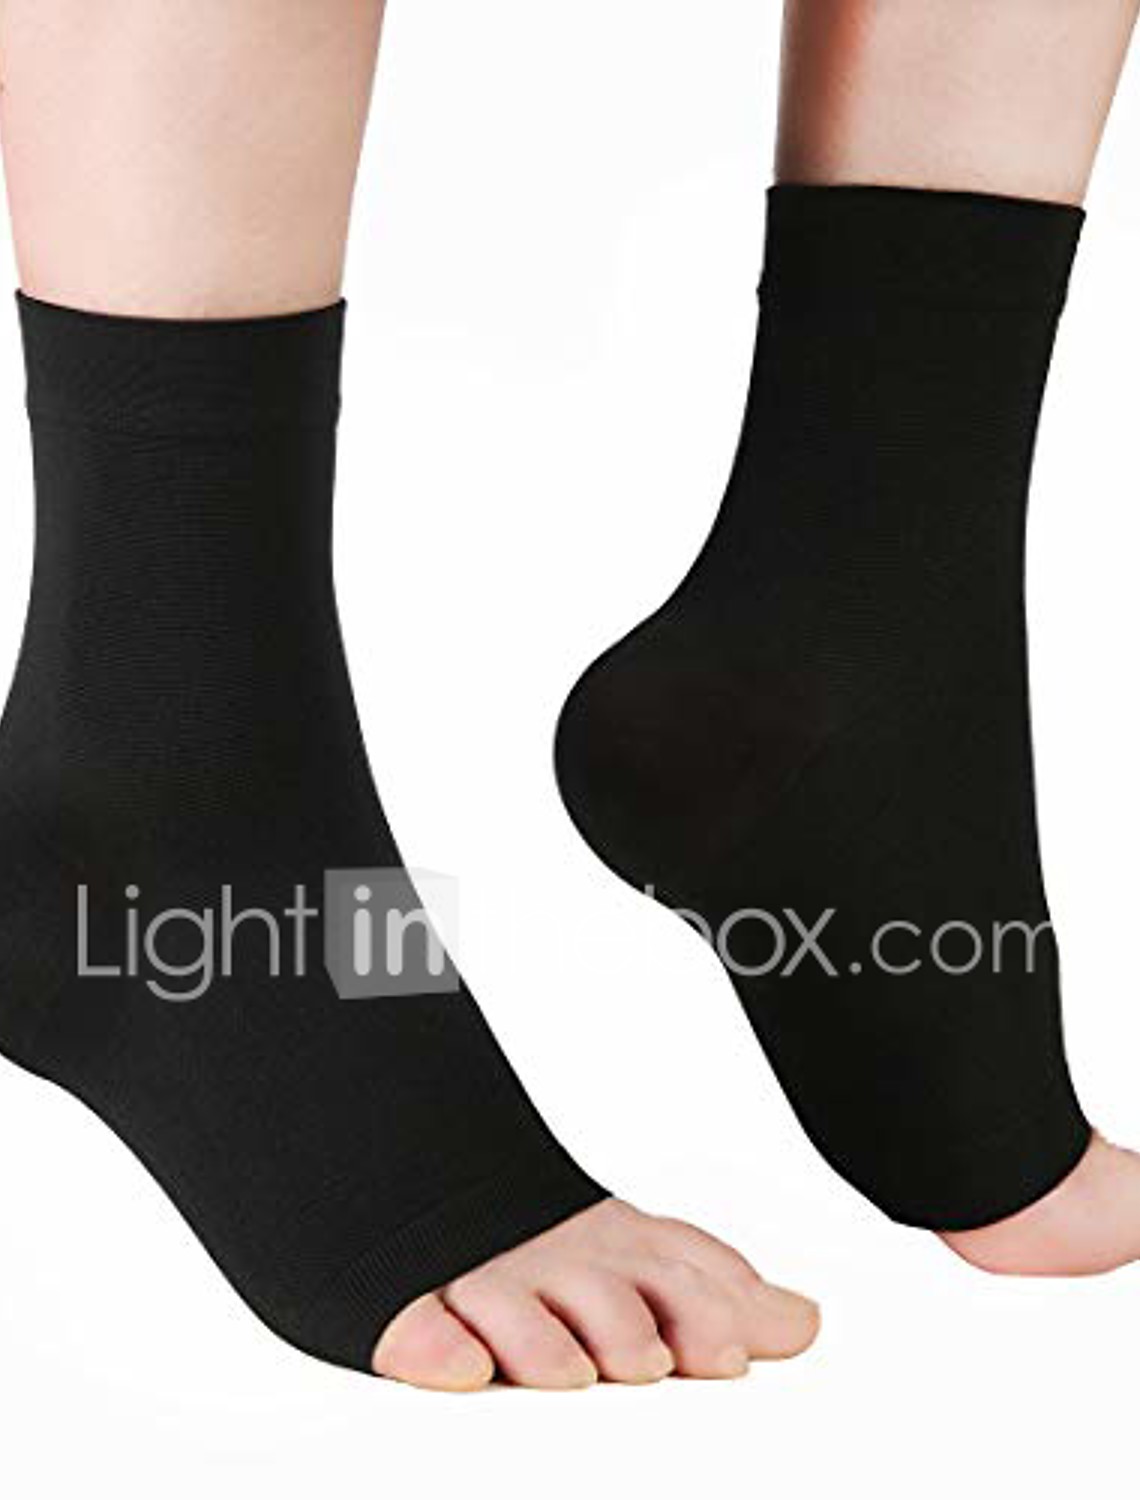 ARTHORN 1 Pair Ankle Support Compression Sleeve Adjustable and Breathable Ankle Brace for Men and Women,M